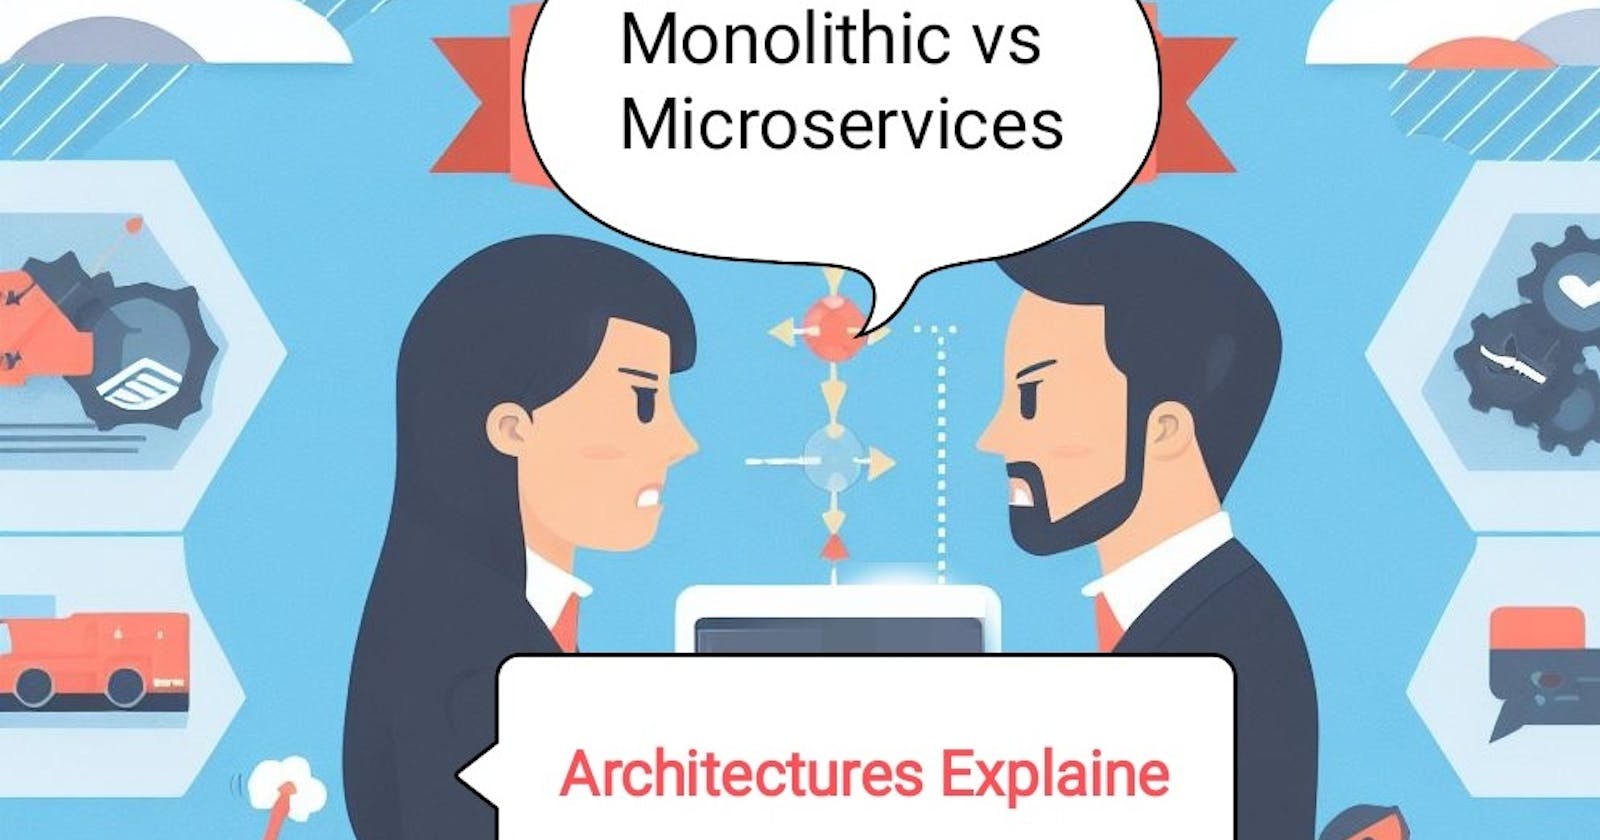 Romeo and Juliet Fight Over Monolithic vs. Microservice Architecture